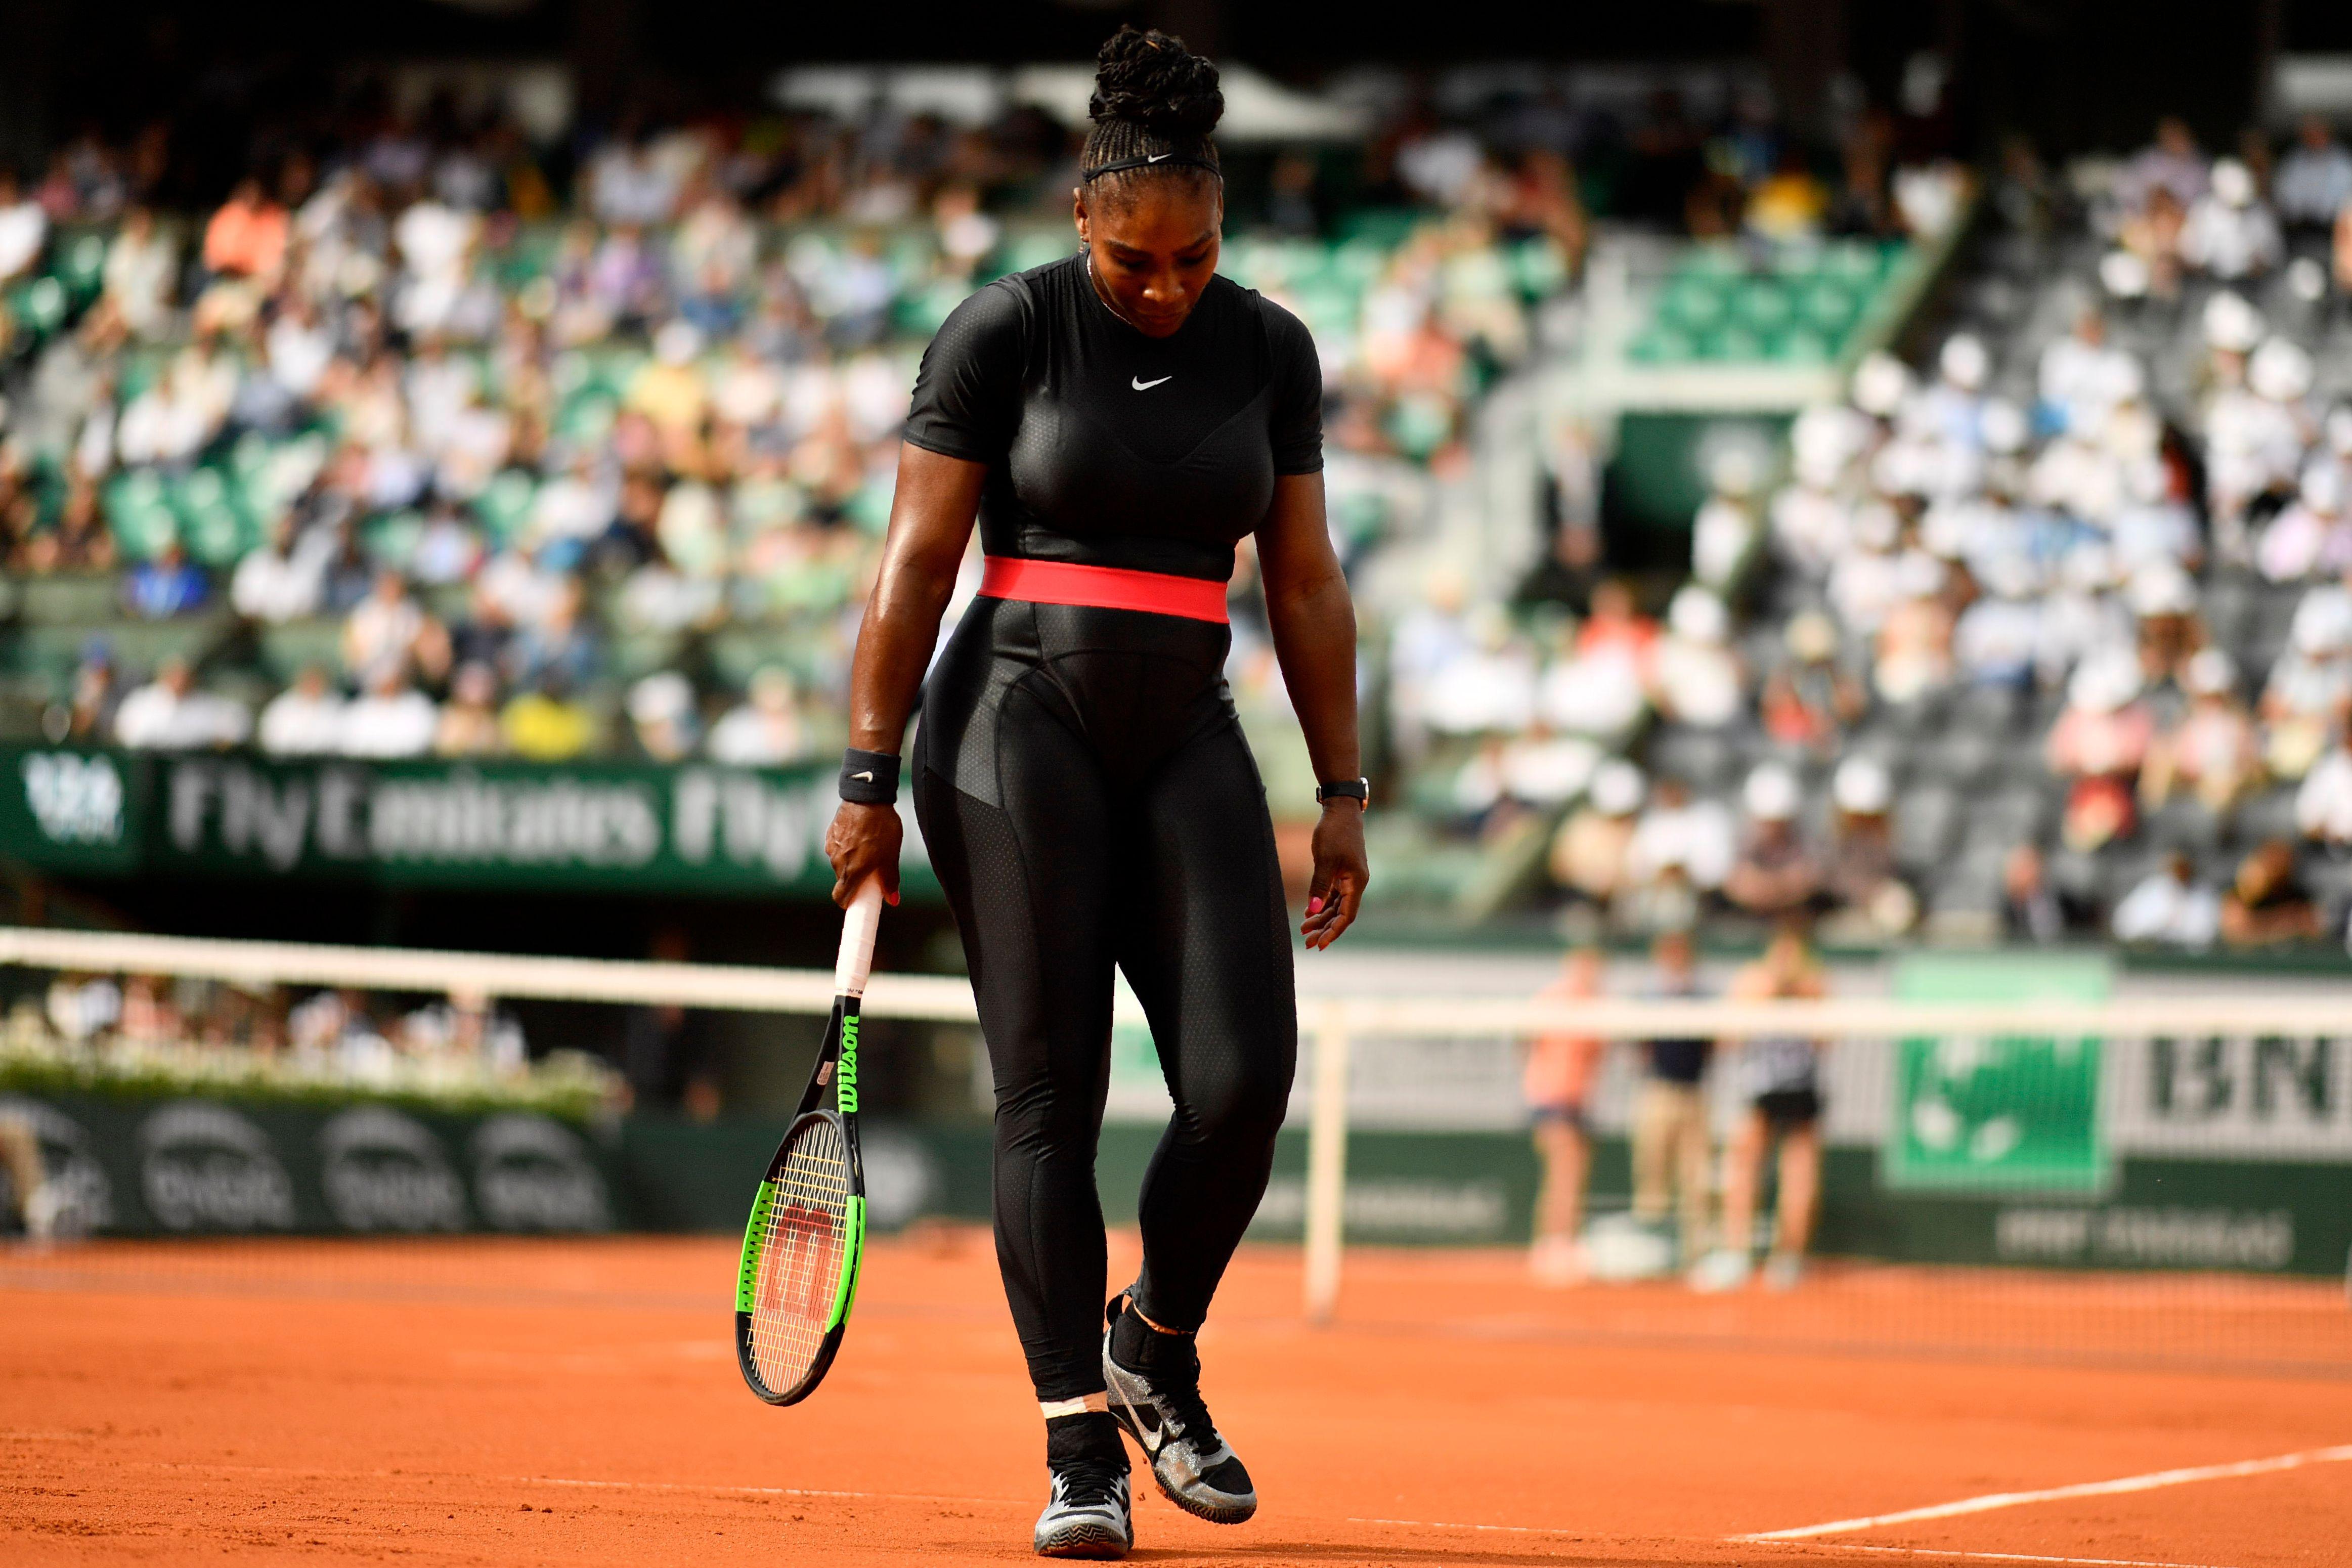 Serena Williams of the US walks on court after a point against Czech Republic's Kristyna Pliskova during their women's singles first round match on day three of The Roland Garros 2018 French Open tennis tournament in Paris on May 29, 2018. (Photo by CHRISTOPHE SIMON / AFP)        (Photo credit should read CHRISTOPHE SIMON/AFP/Getty Images)